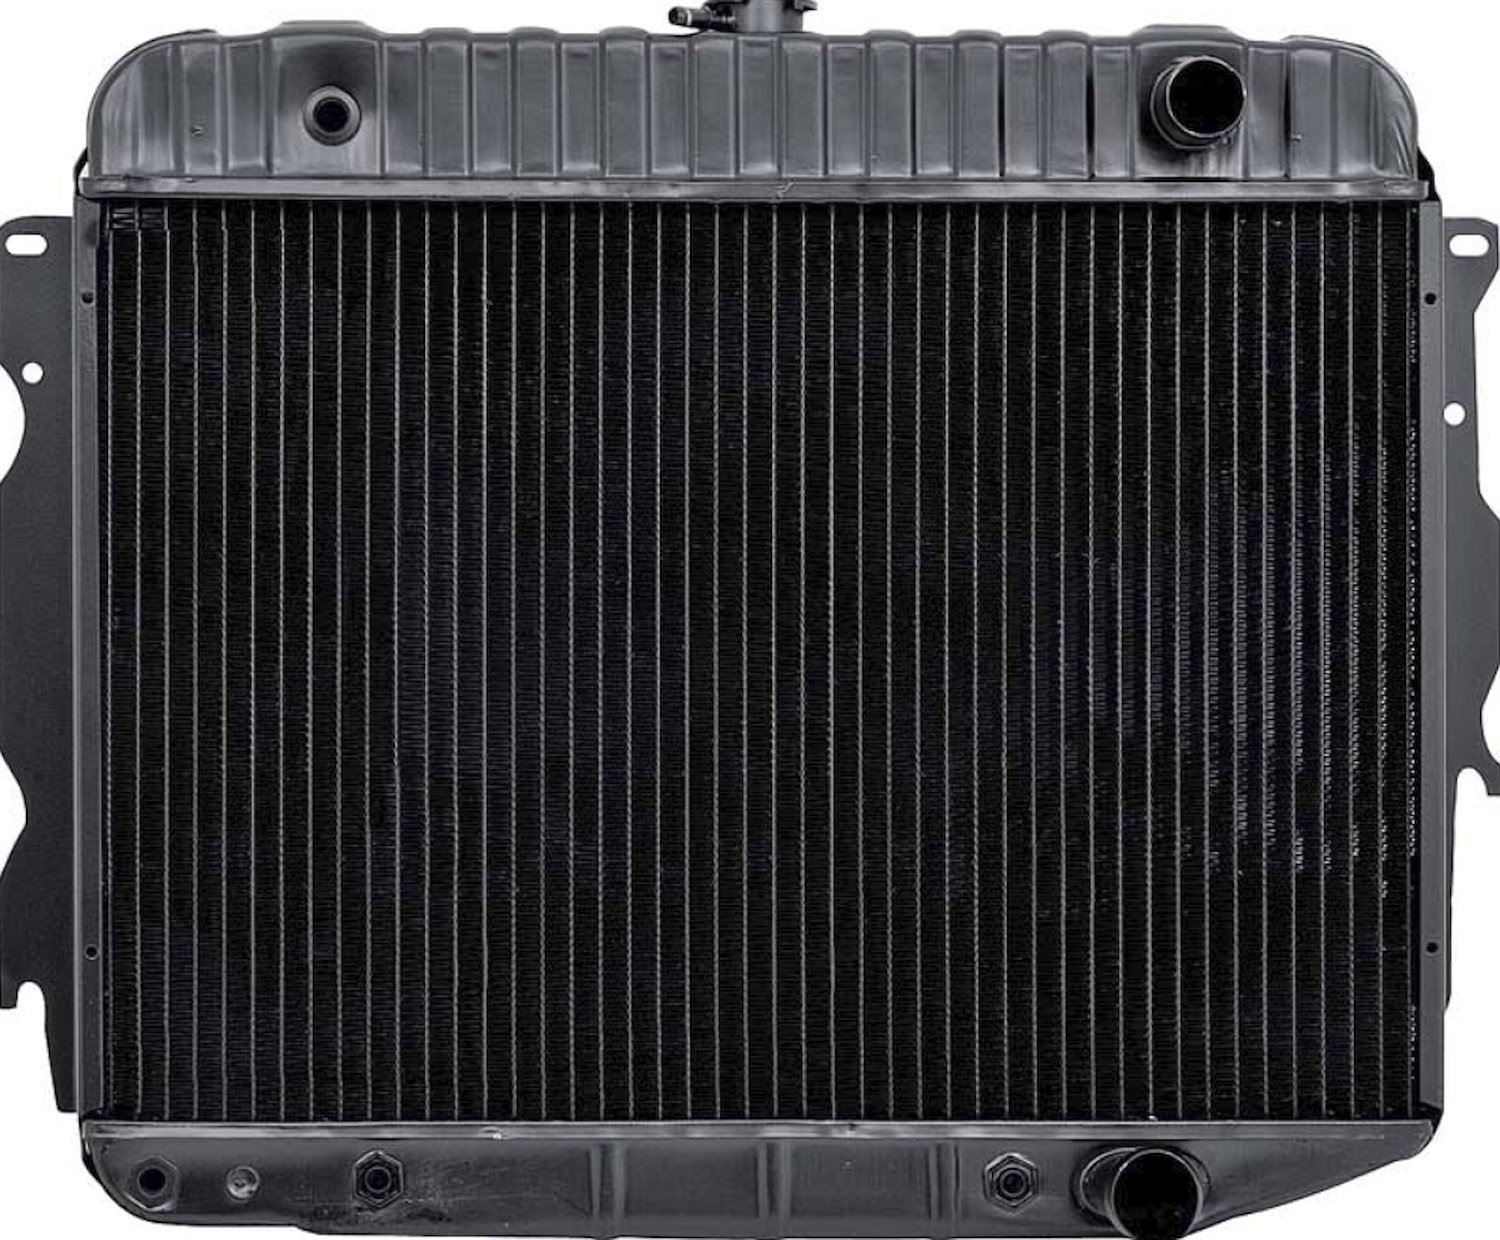 MD2294A Replacement Radiator 1973 Mopar B/E-Body Big Block V8 With Automatic Trans 3 Row 26" Wide